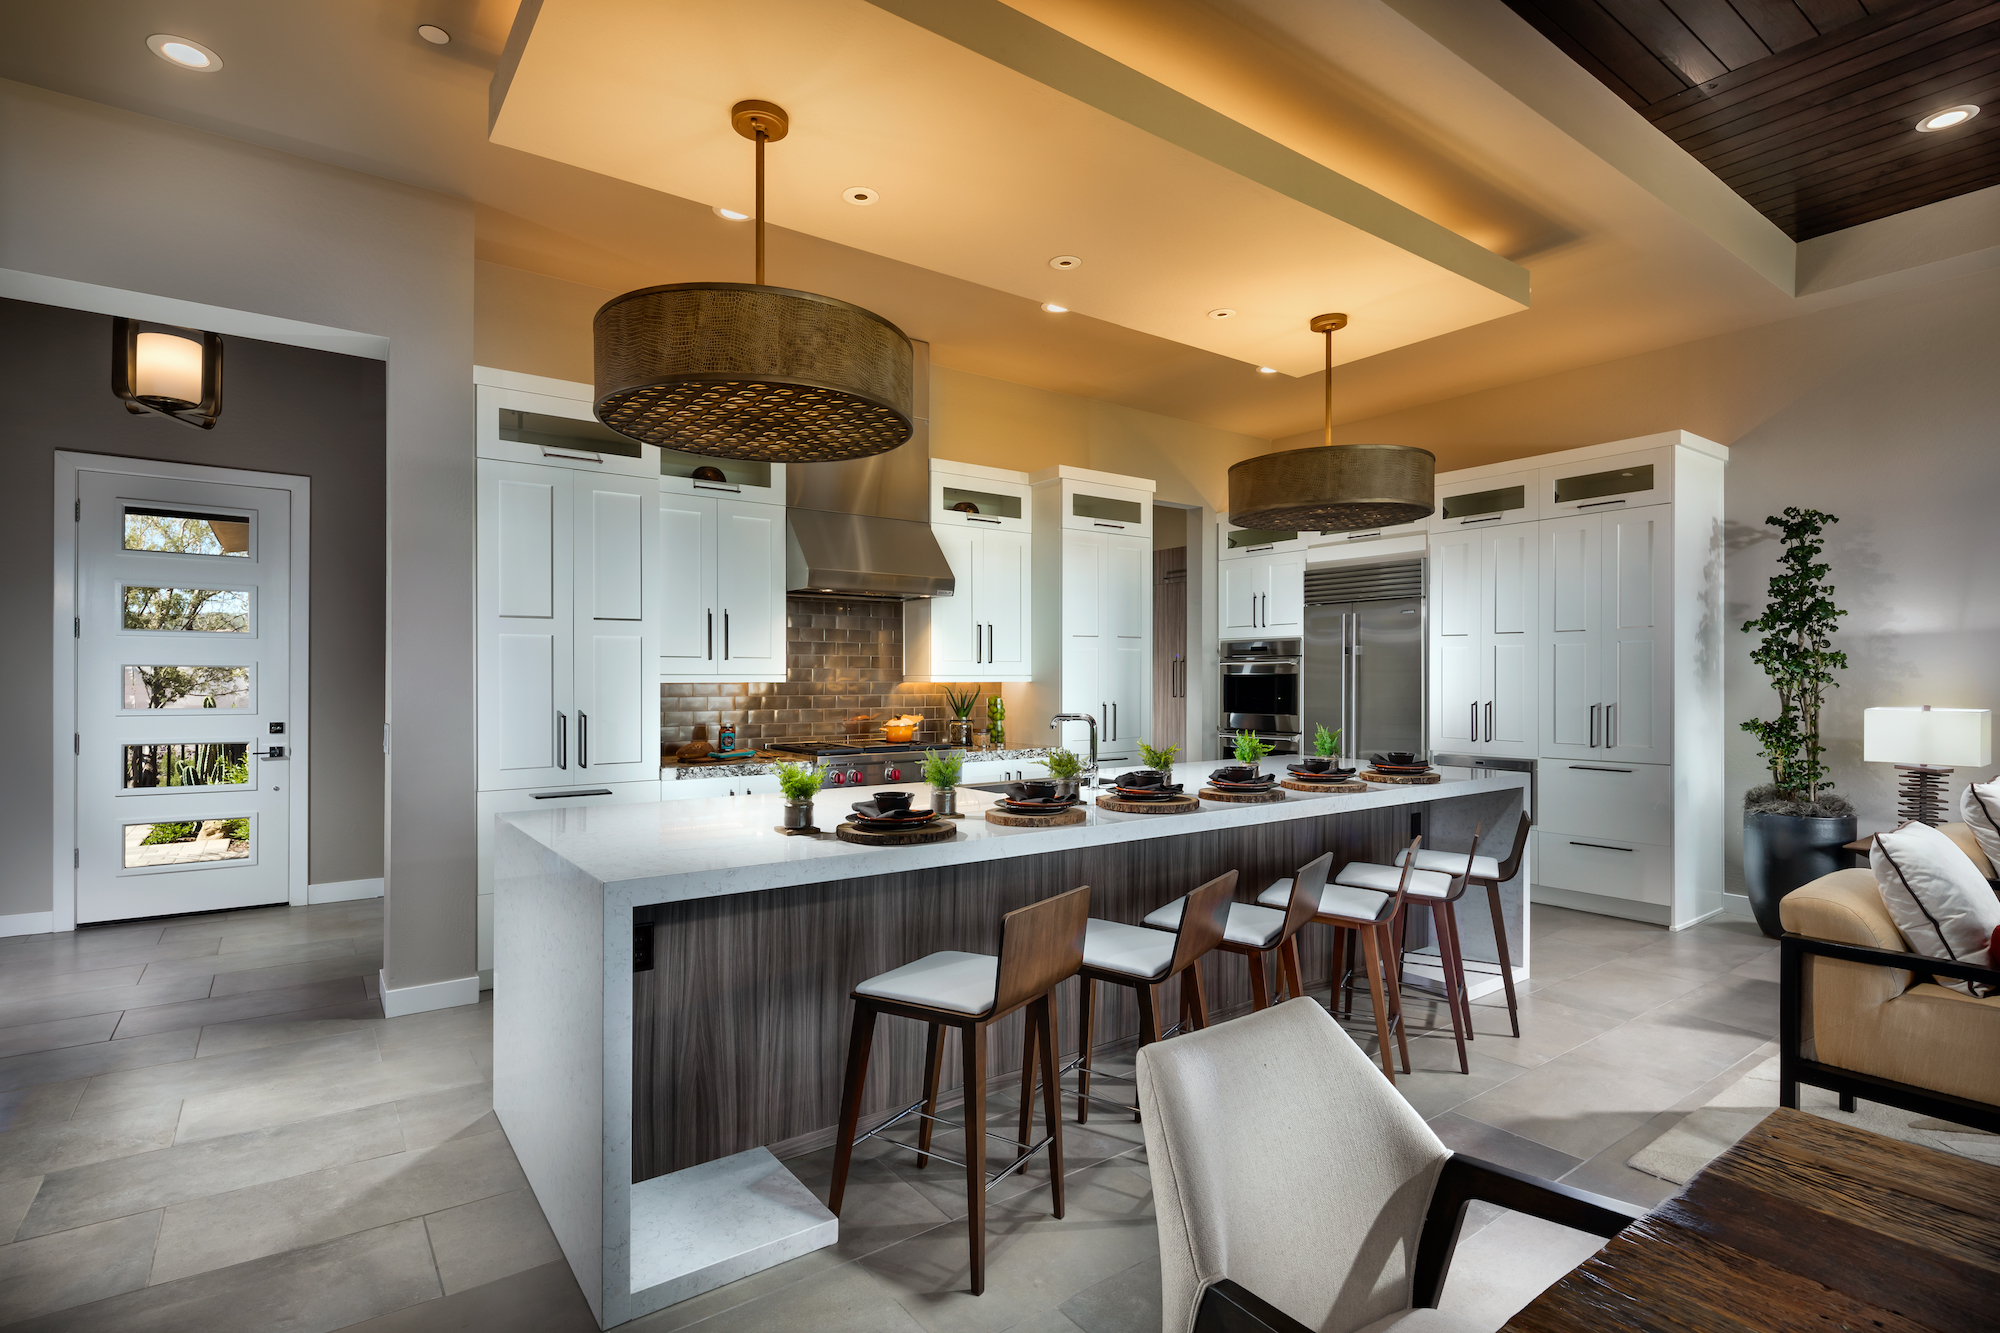 25 Luxury Kitchen Ideas for Your Dream Home | Build Beautiful